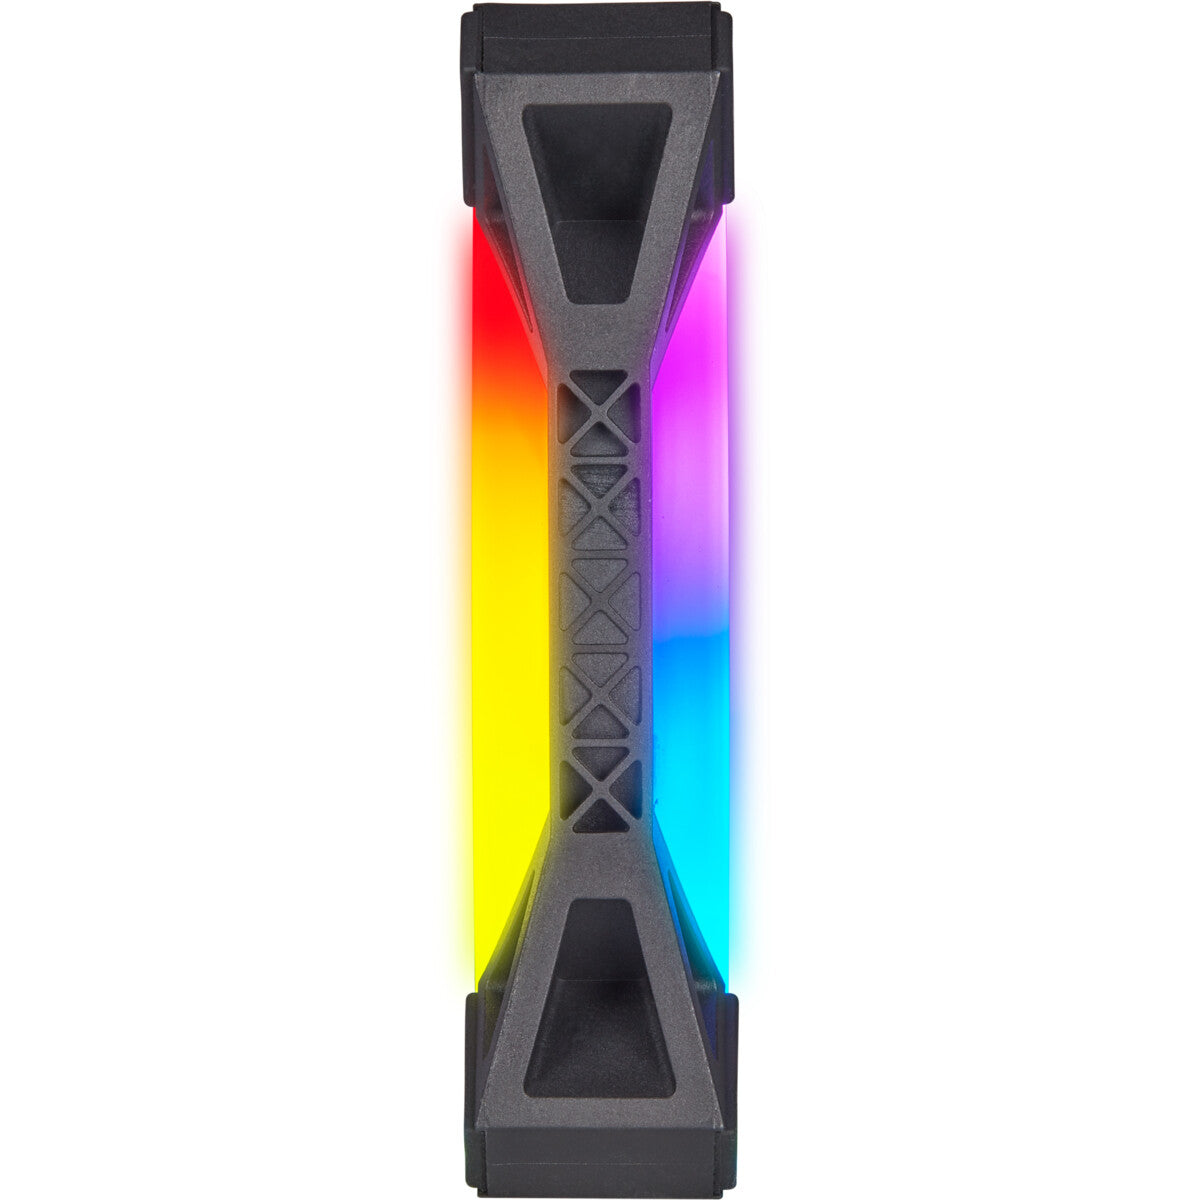 Corsair iCUE QL120 RGB - Computer Case Fan in Black / White - 120mm (Pack of 3)